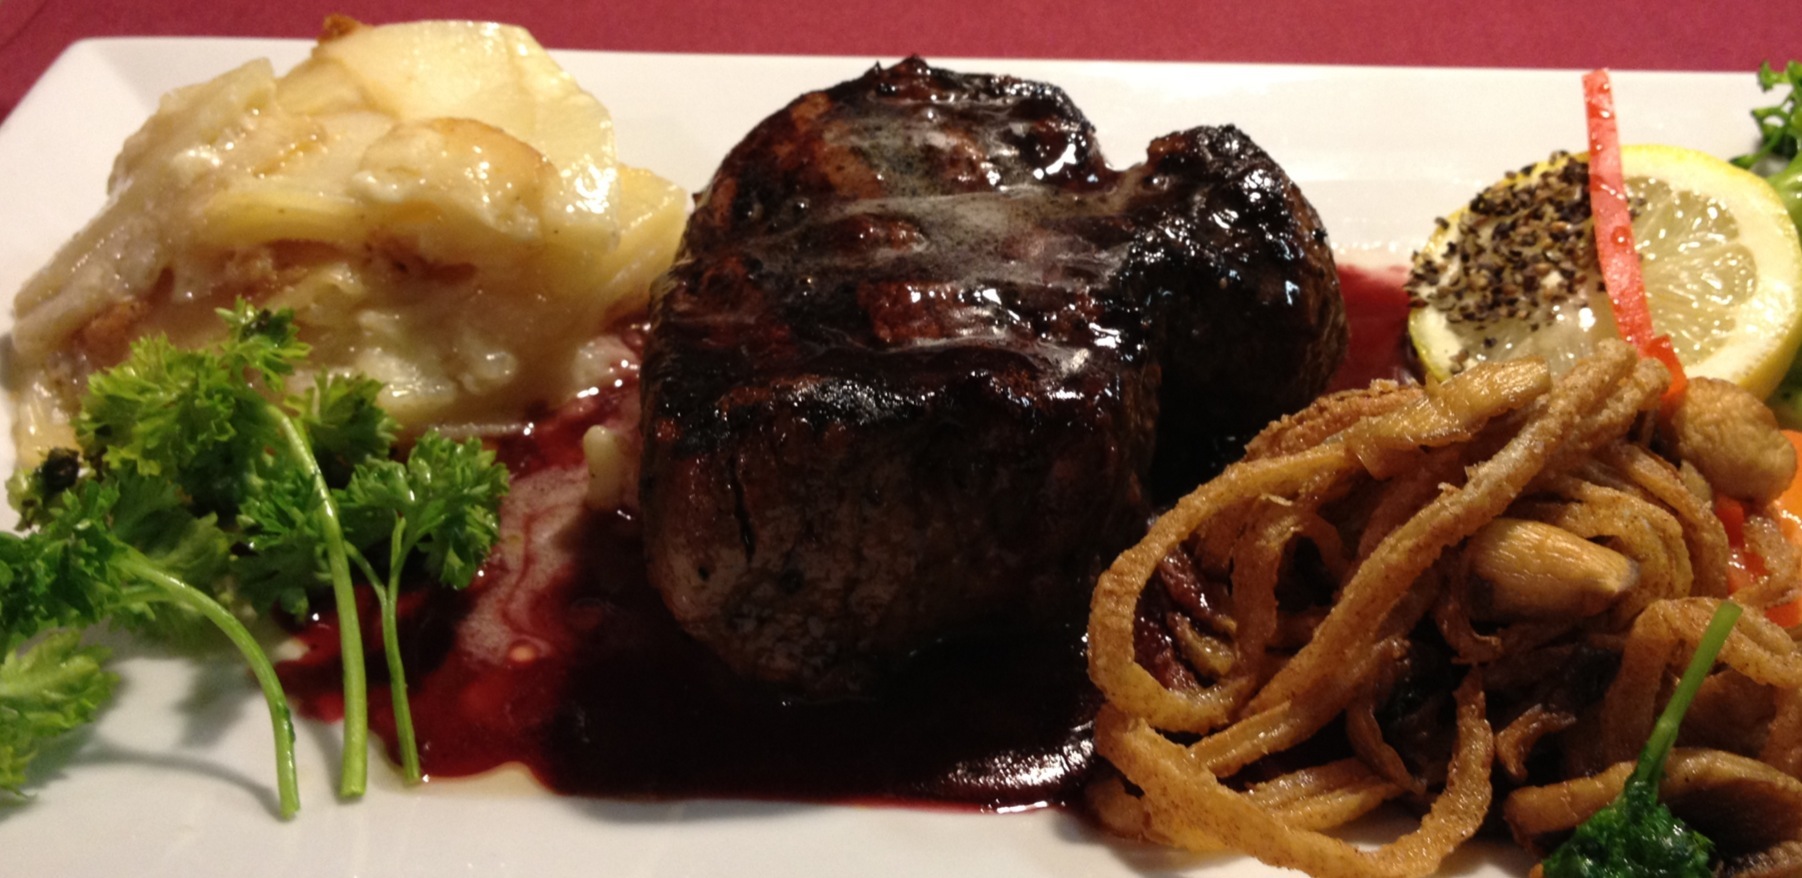 Grilled Mignon(9oz.) with Merlot Wine Reduction, Sizzled Mushrooms-Onions...Whipped Potatoes